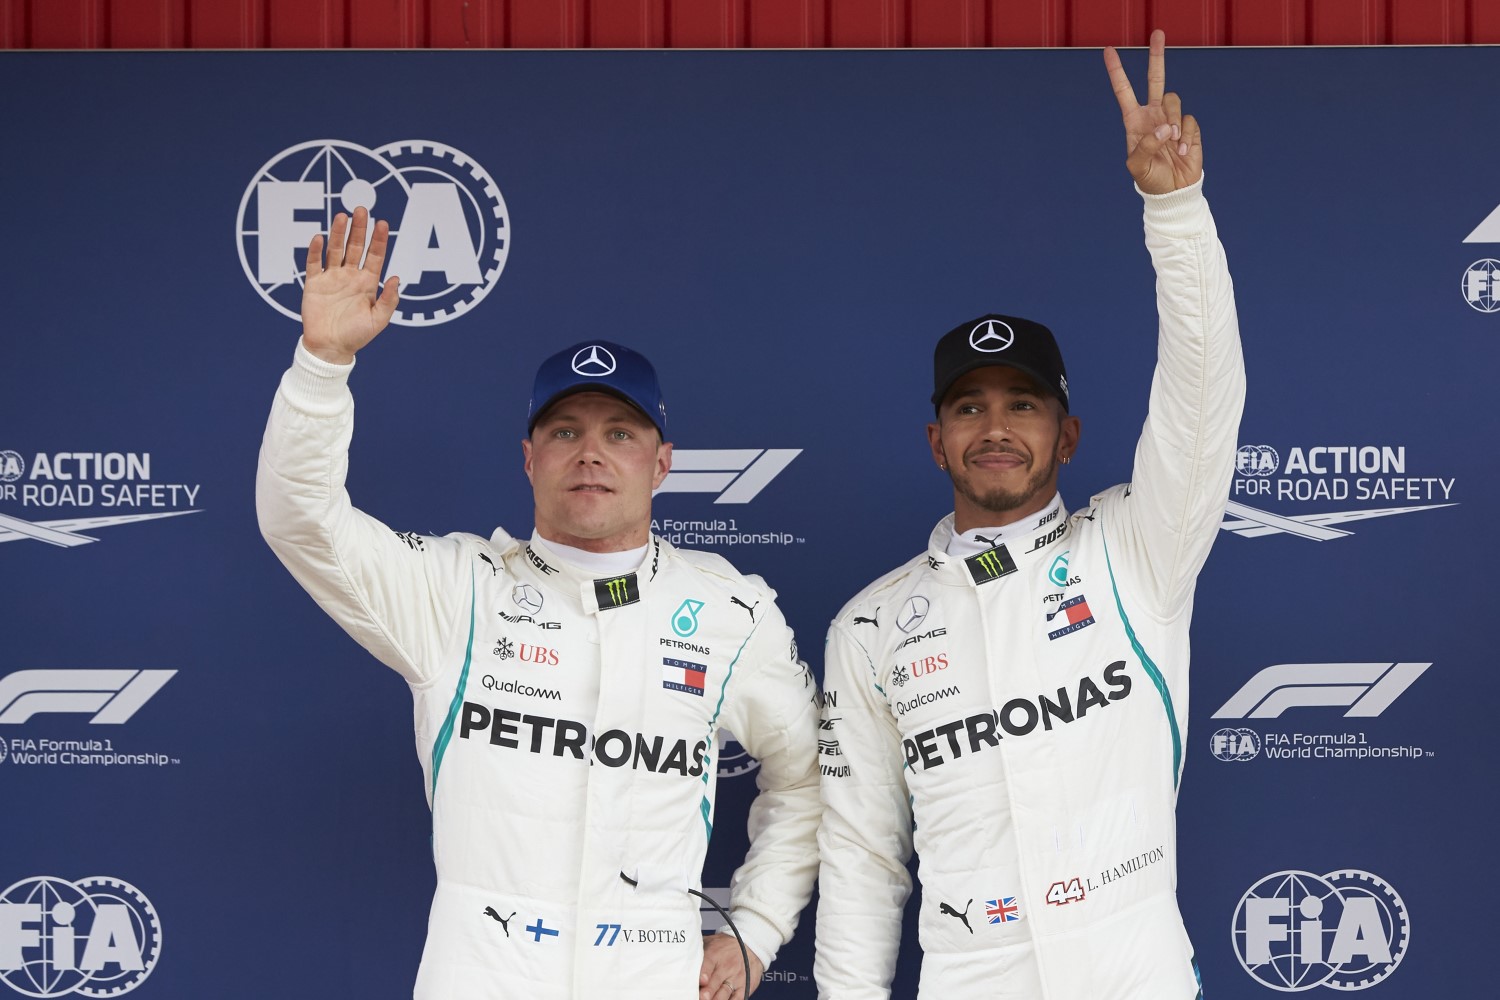 Bottas and Hamilton are not going anywhere. When you have the best car you don't leave